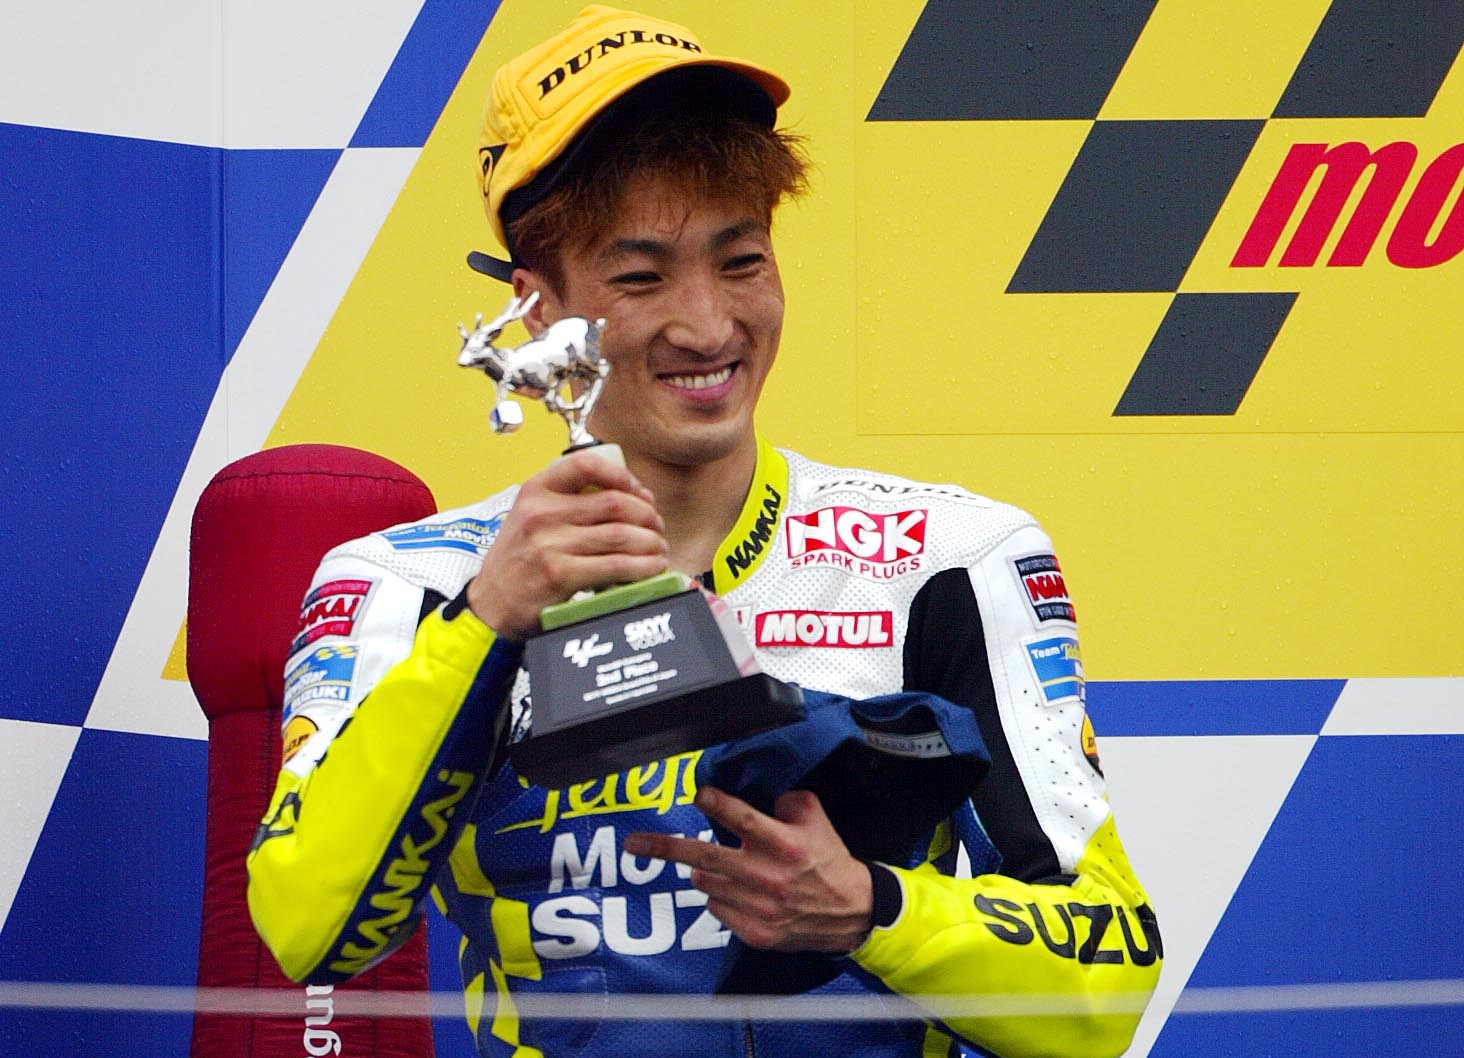 MotoGP wild-cards/replacements that finished on the podium: Bayliss ...